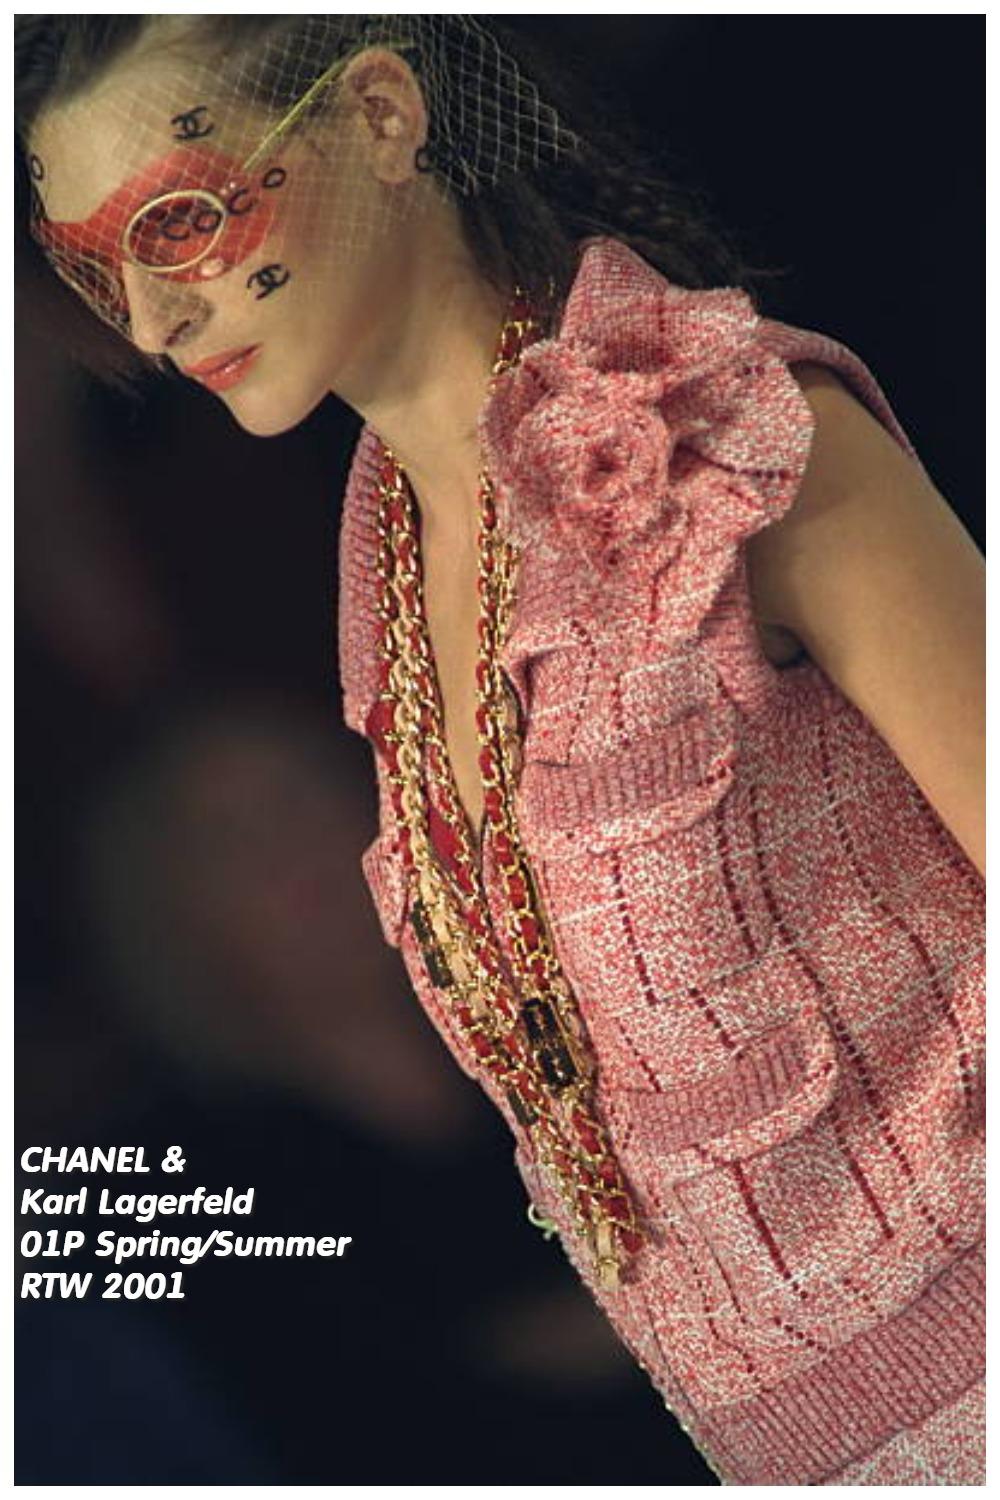 Rare! CHANEL & Karl Lagerfeld 01P Spring/Summer RTW 2001 red and white plaid seq For Sale 3